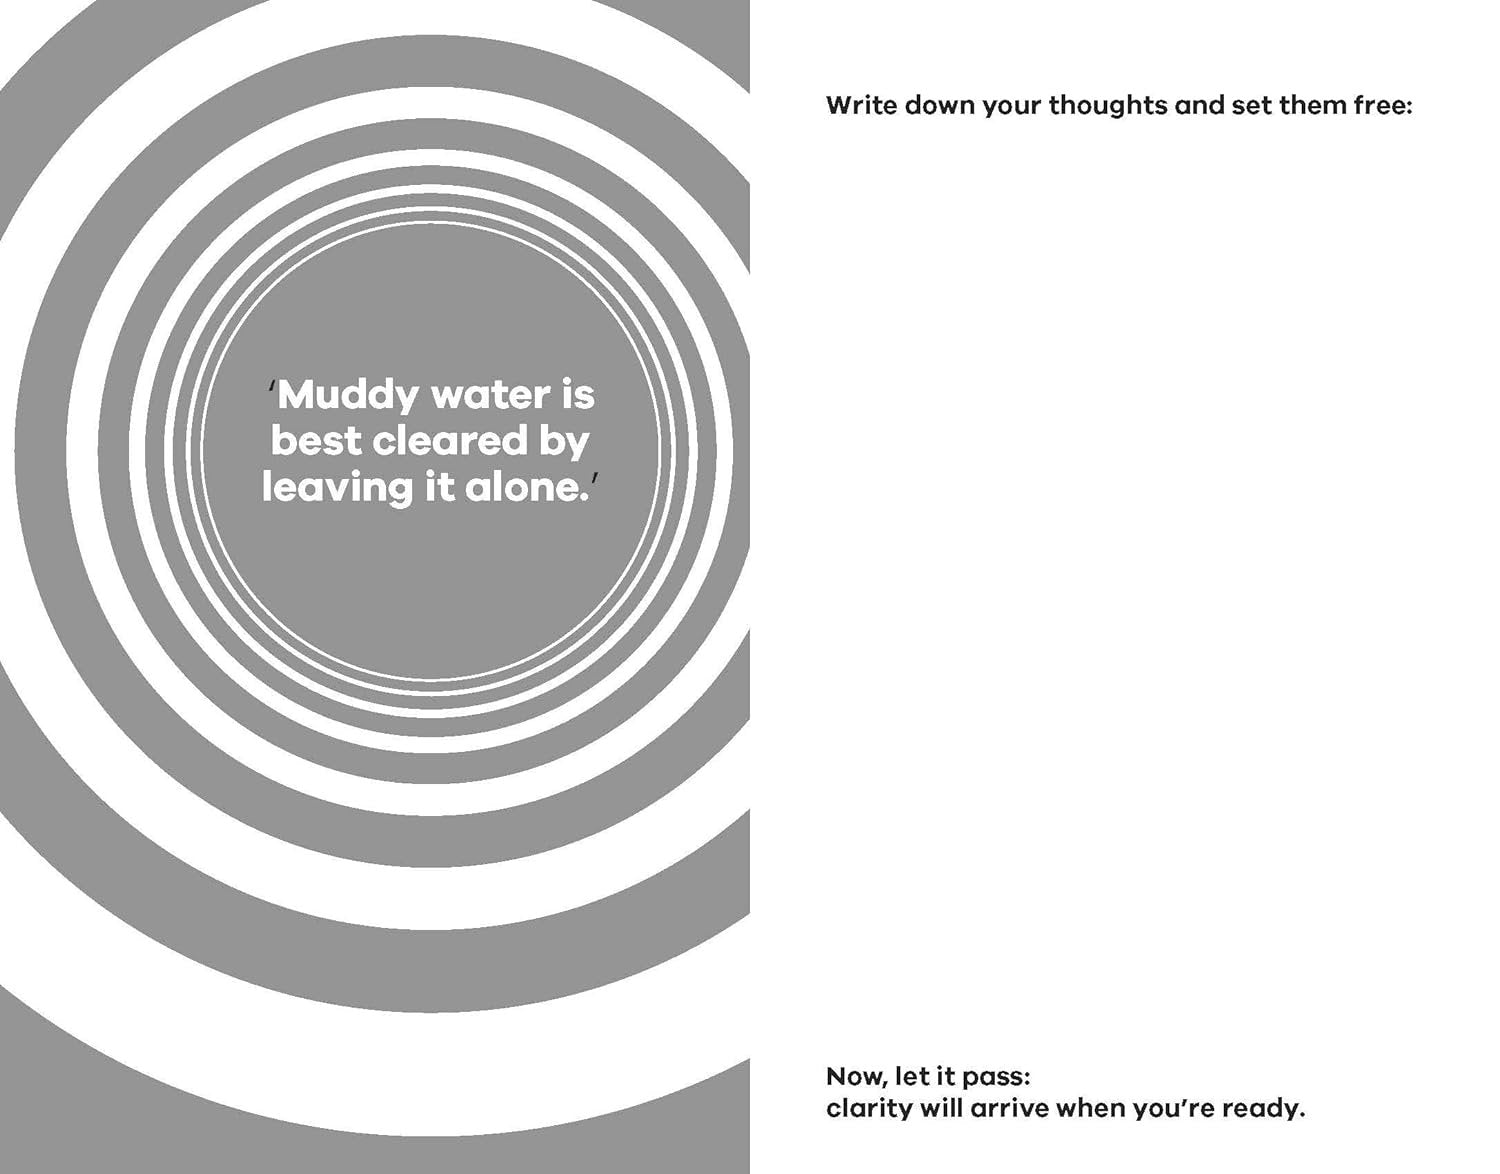 Monochrome image featuring concentric circles in grayscale with a quote in the center saying 'muddy water is best cleared by leaving it alone,' from What a Time to Journal: Work Out Why You Are Already Enough, by Chidera Eggerue.